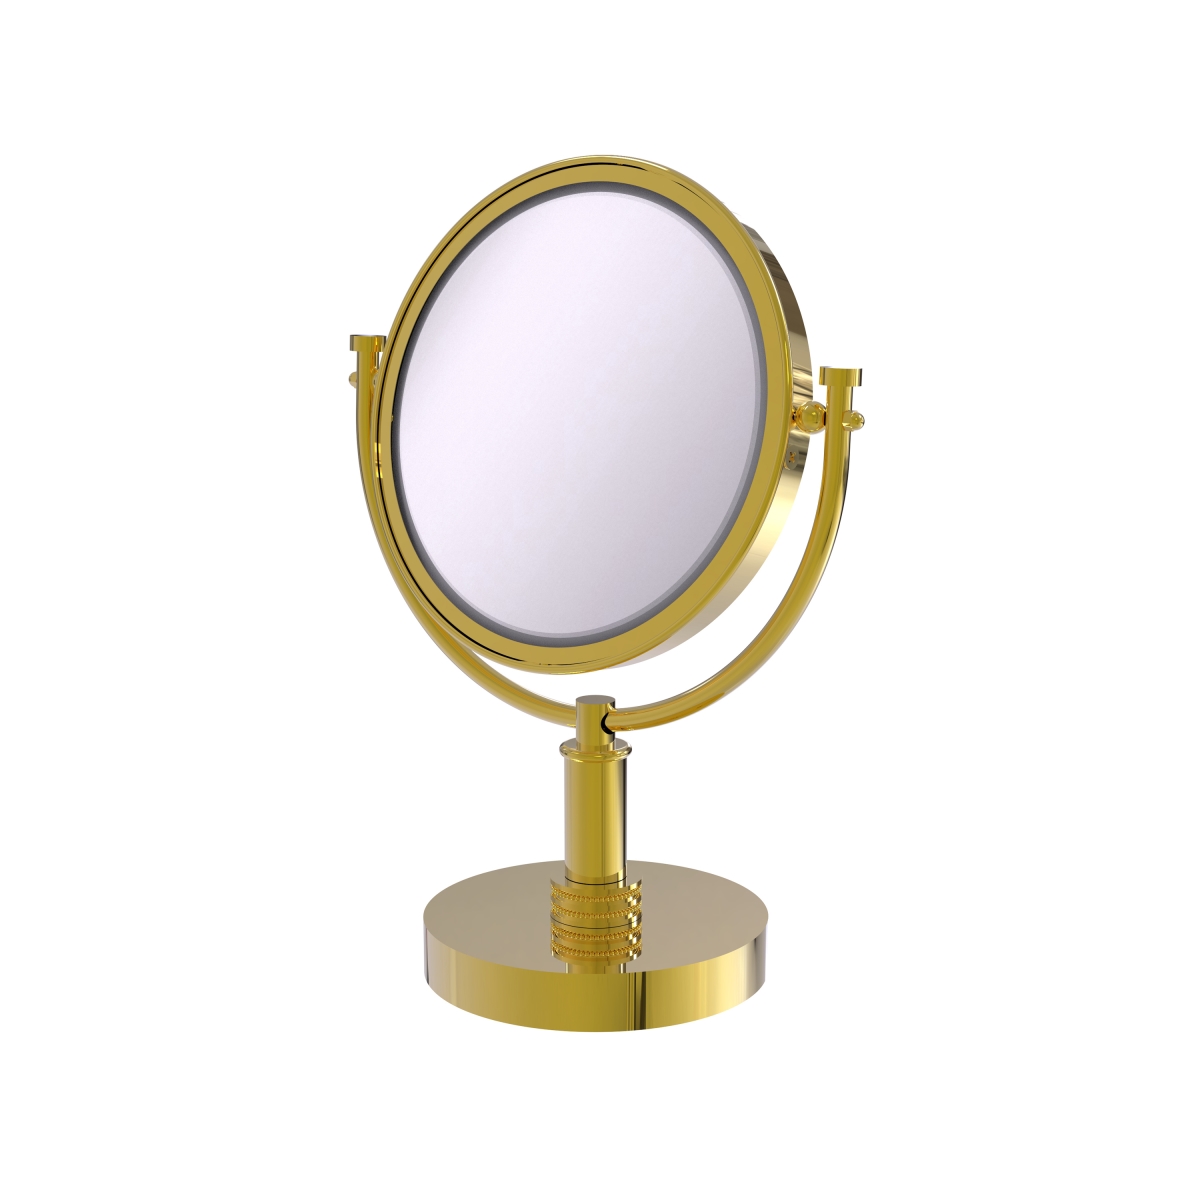 Picture of Allied Brass DM-4D-3X-PB 8 in. Vanity Top Make-Up Mirror 3X Magnification, Polished Brass - 15 x 8 x 8 in.